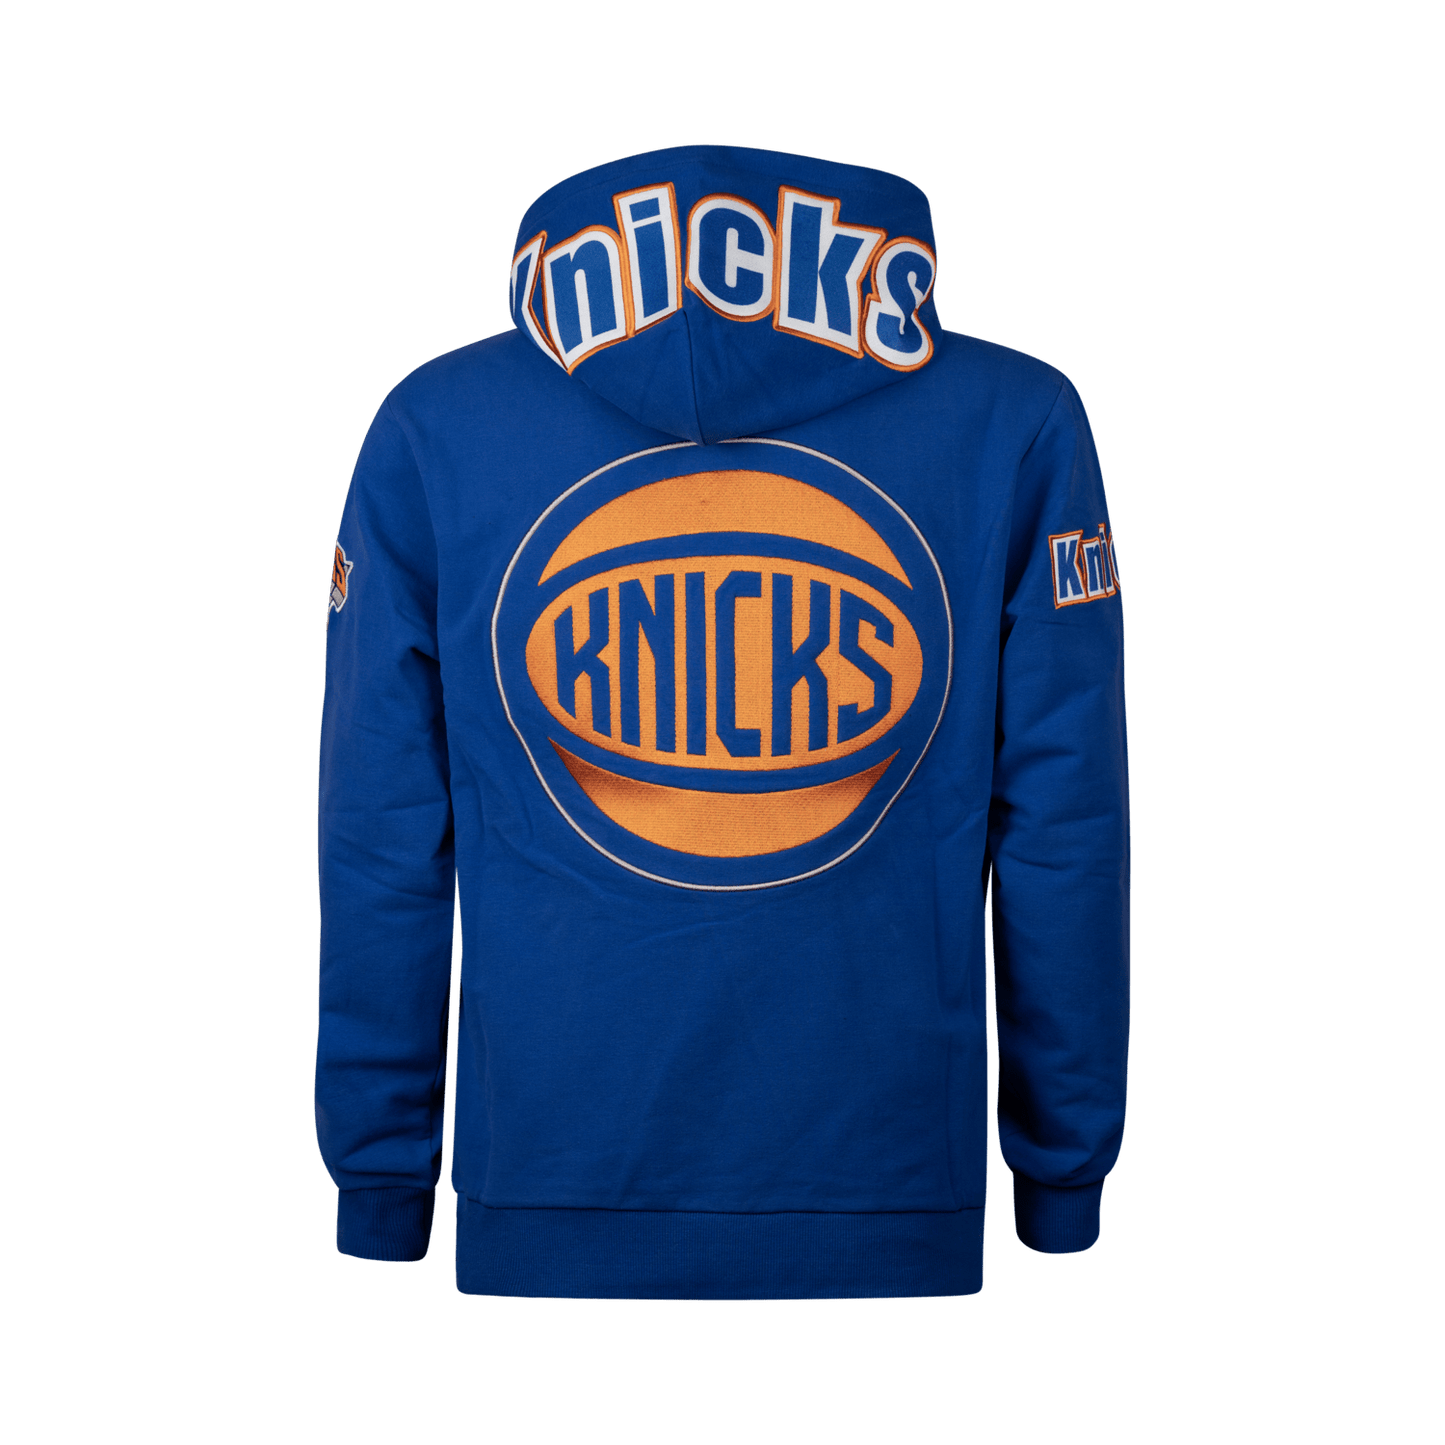 Fisll Knicks Oversize Tackle Twill Applique Hood - Back View